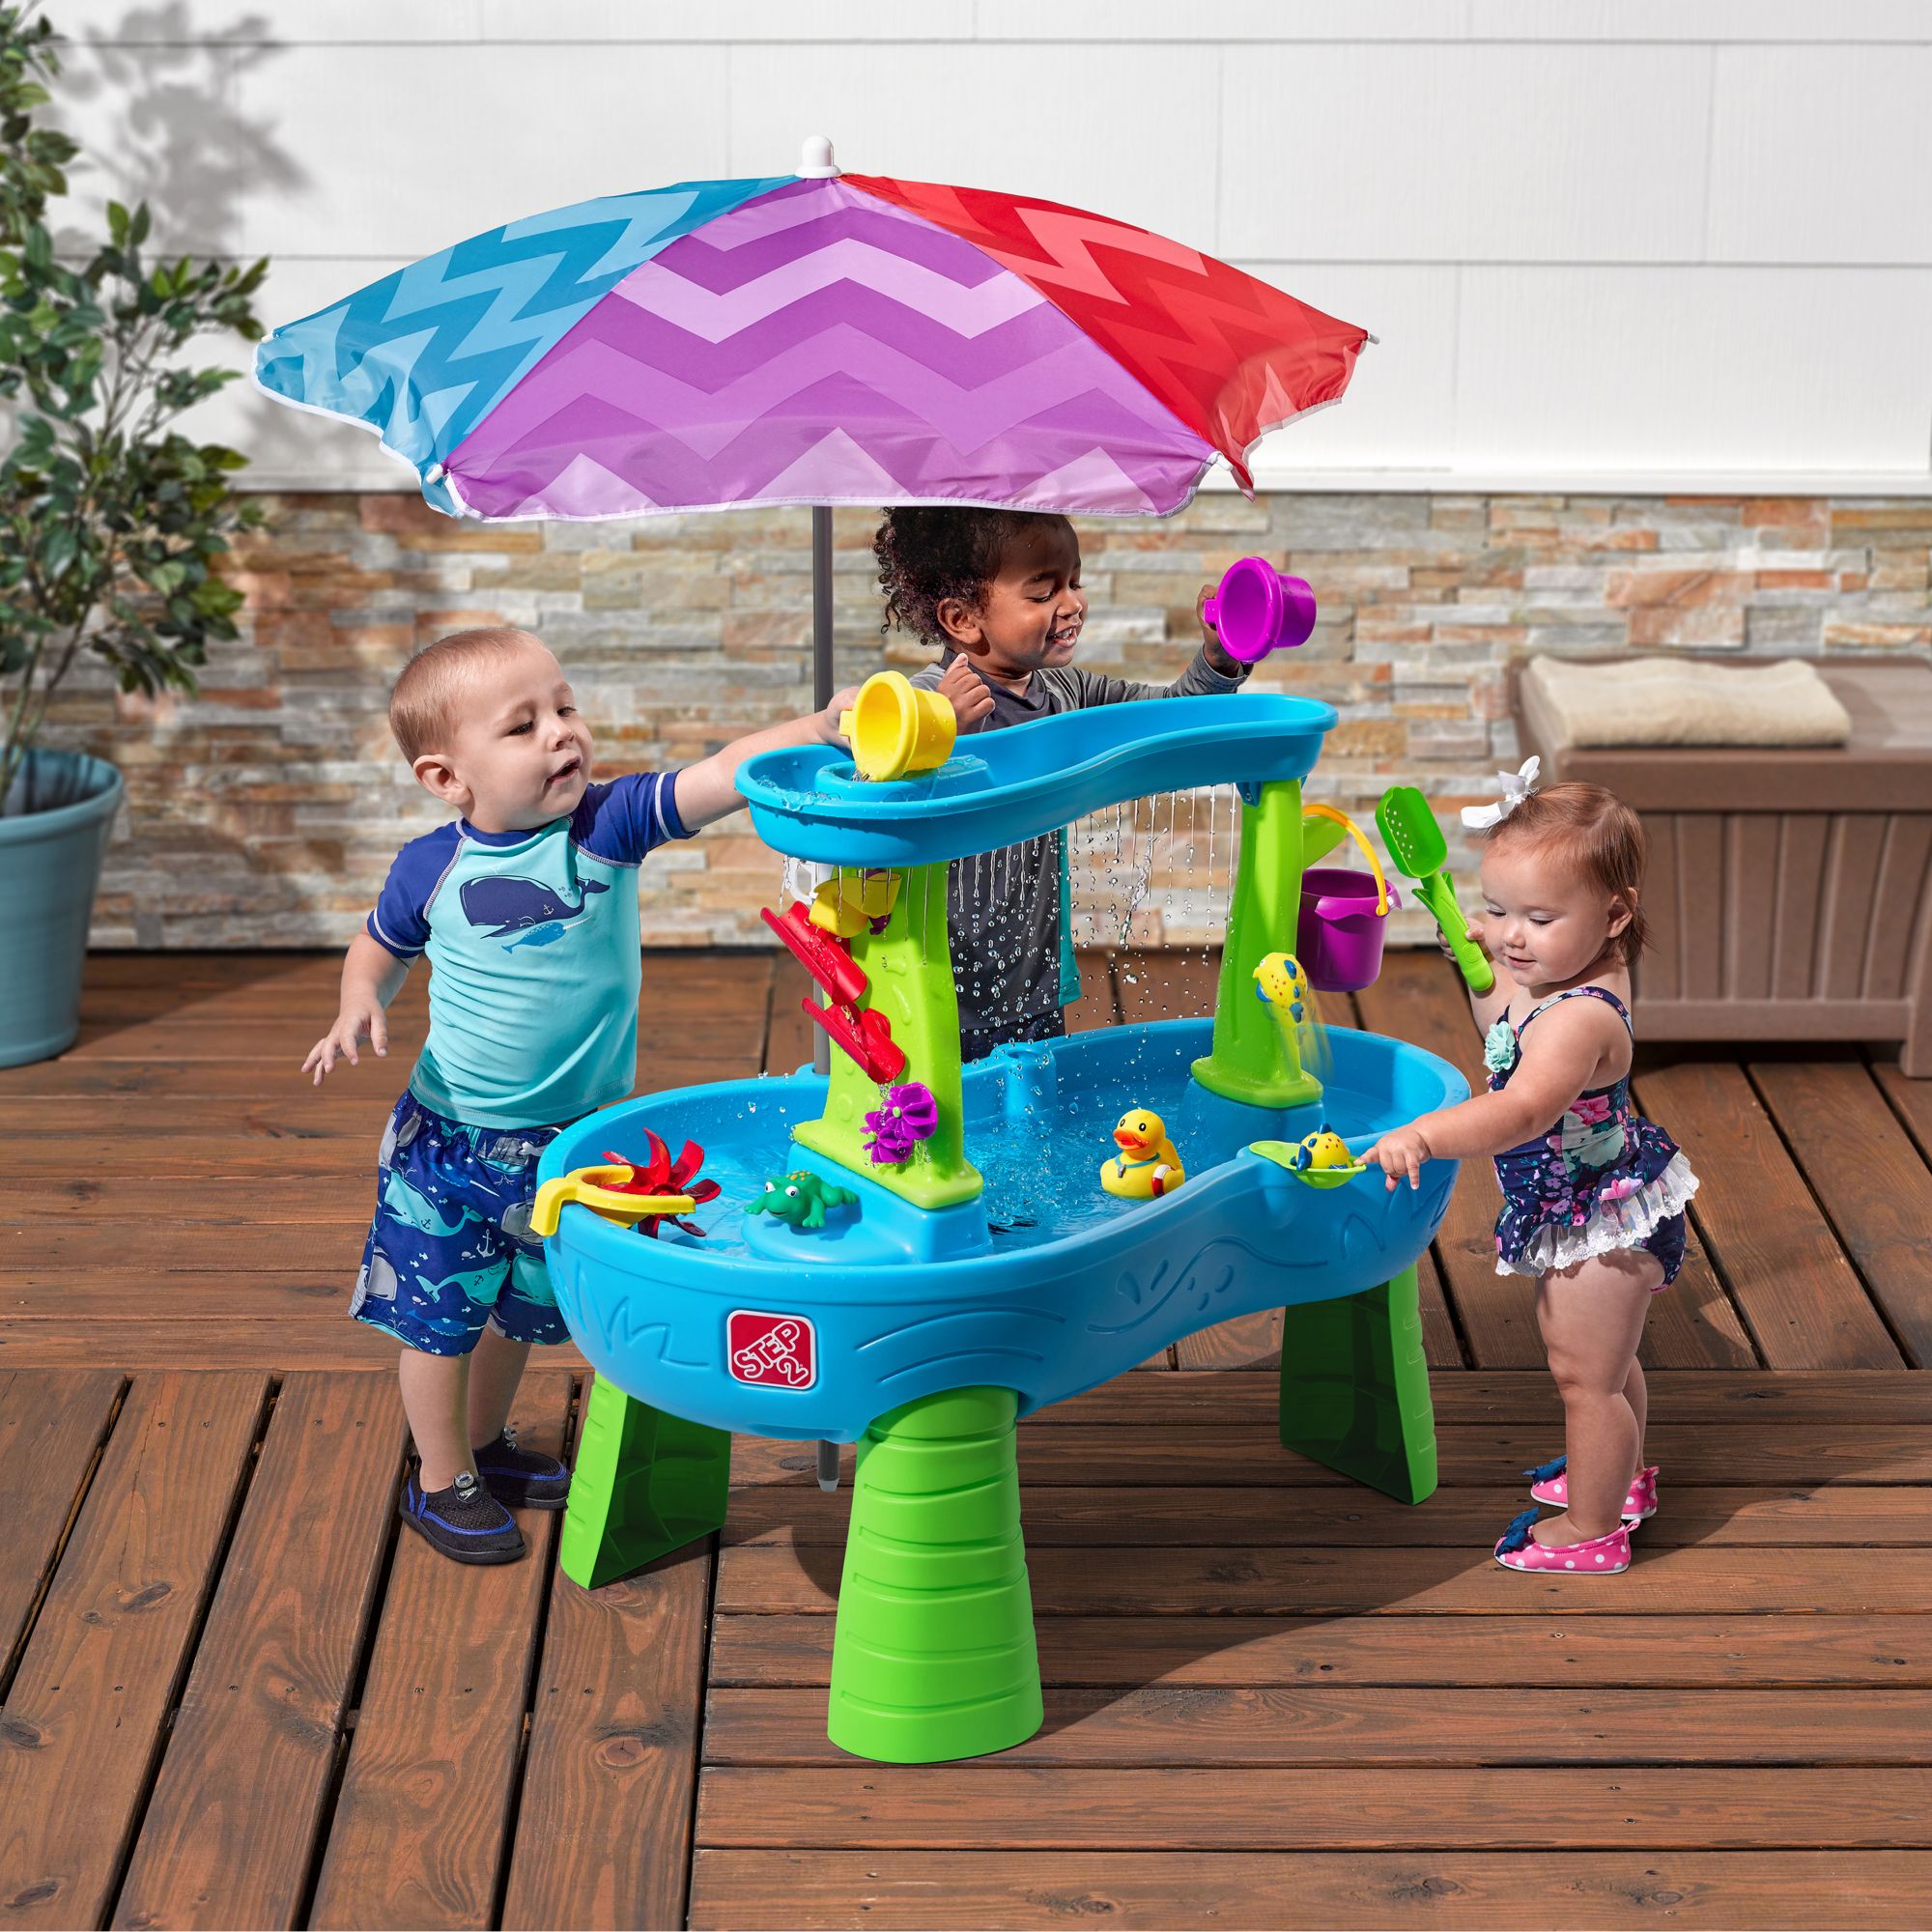 Rainbow Accents Space Saver Sensory Table - Blue